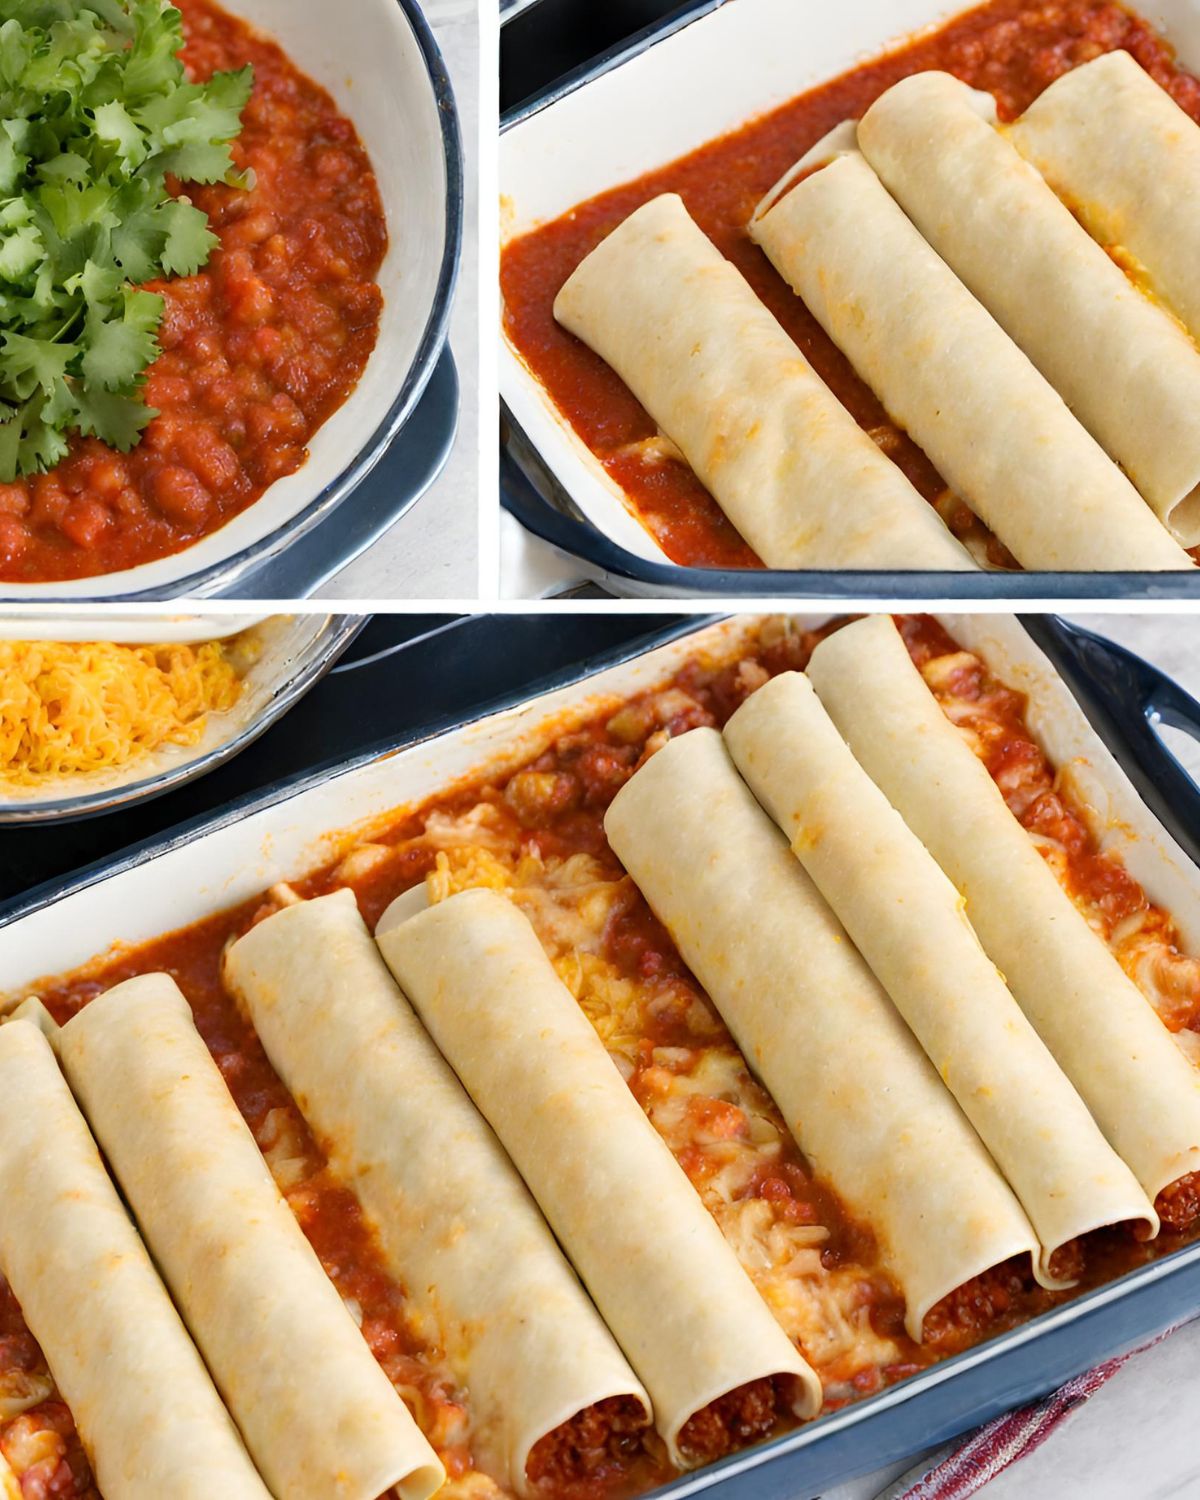 Step-by-step preparation of cheesy chicken enchiladas: cilantro beside salsa, tortillas filled with ingredients above salsa in a dish, completed dish ready for baking.